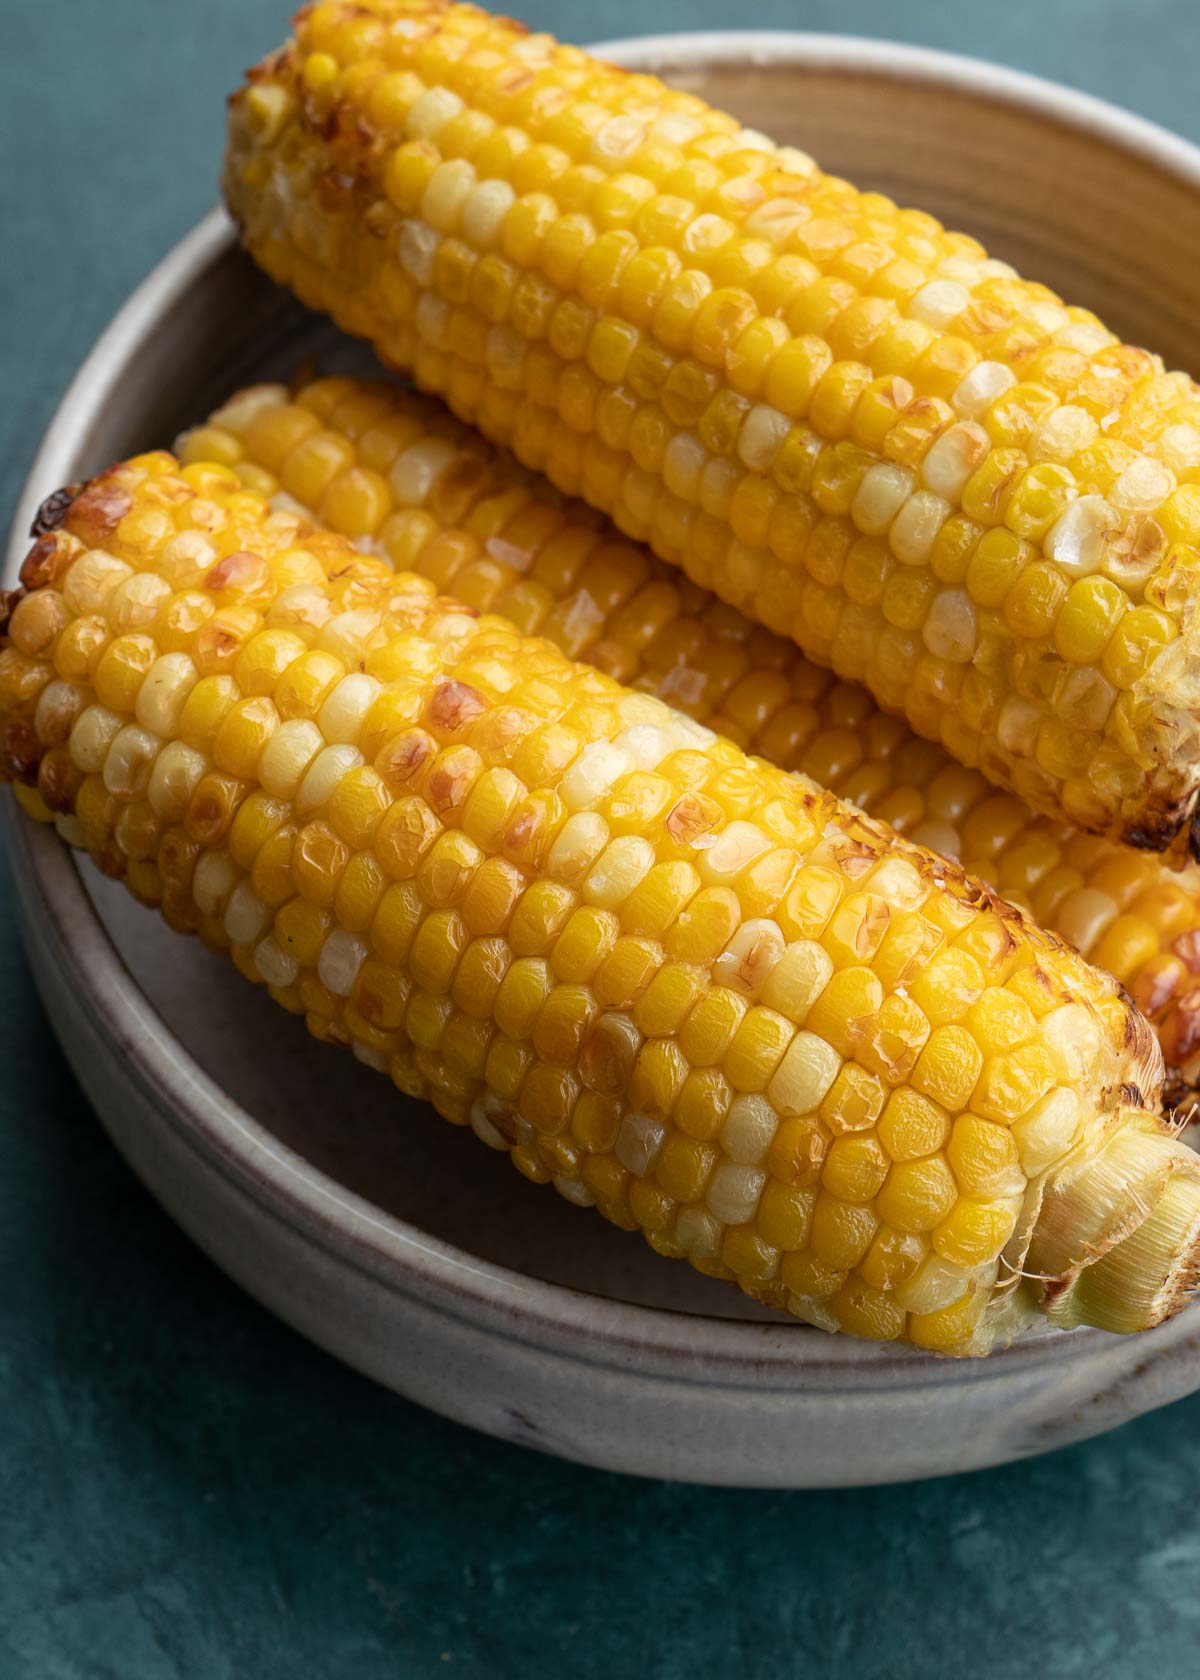 This Air Fryer Corn on the Cob is the best way to cook corn! Ready in just 10 minutes, this corn turns out perfect every single time!